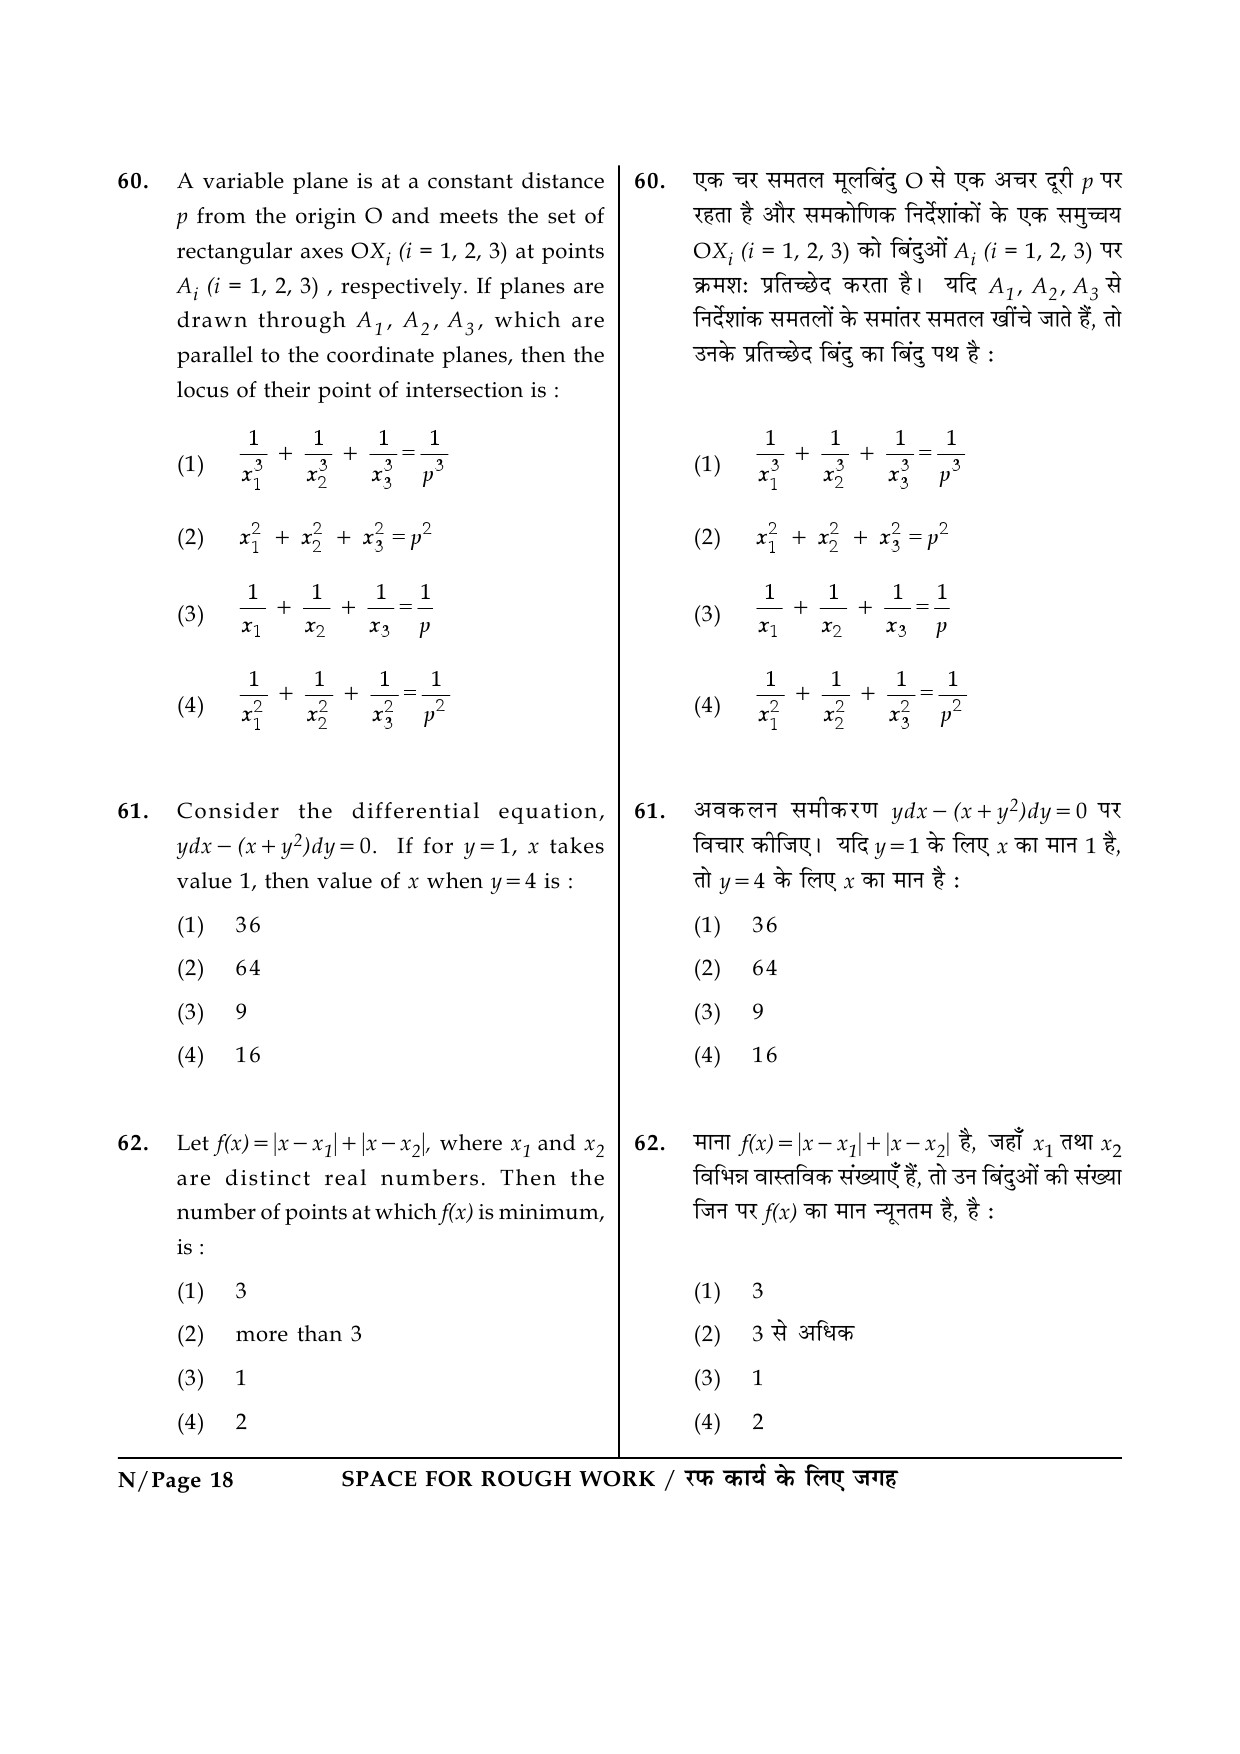 JEE Main Exam Question Paper 2015 Booklet N 18